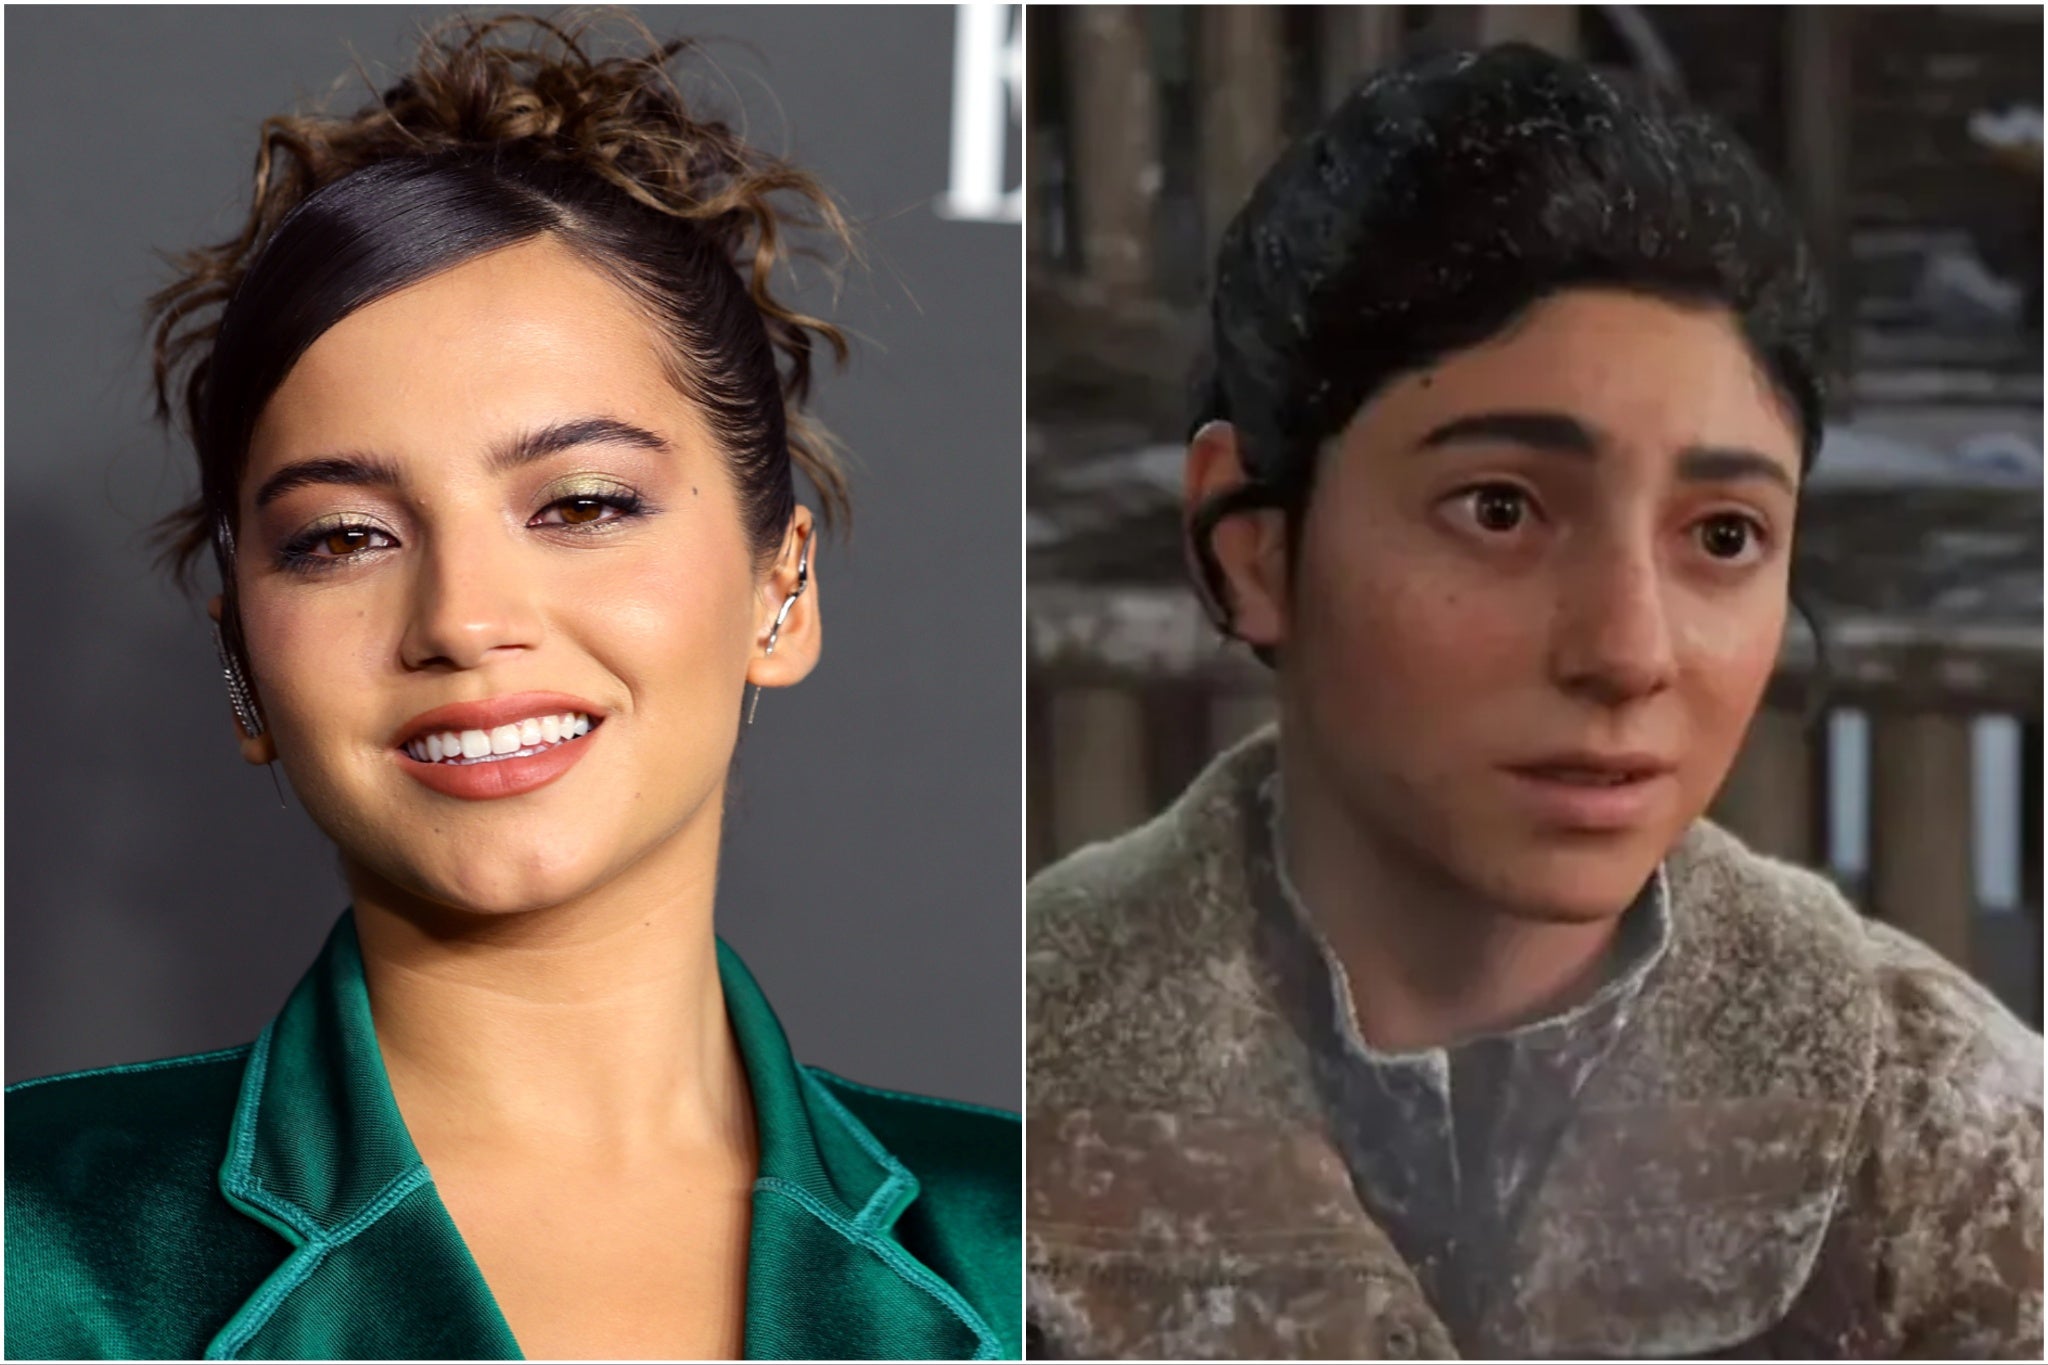 Isabela Merced (left) and Dina from ‘The Last of Us Part II’